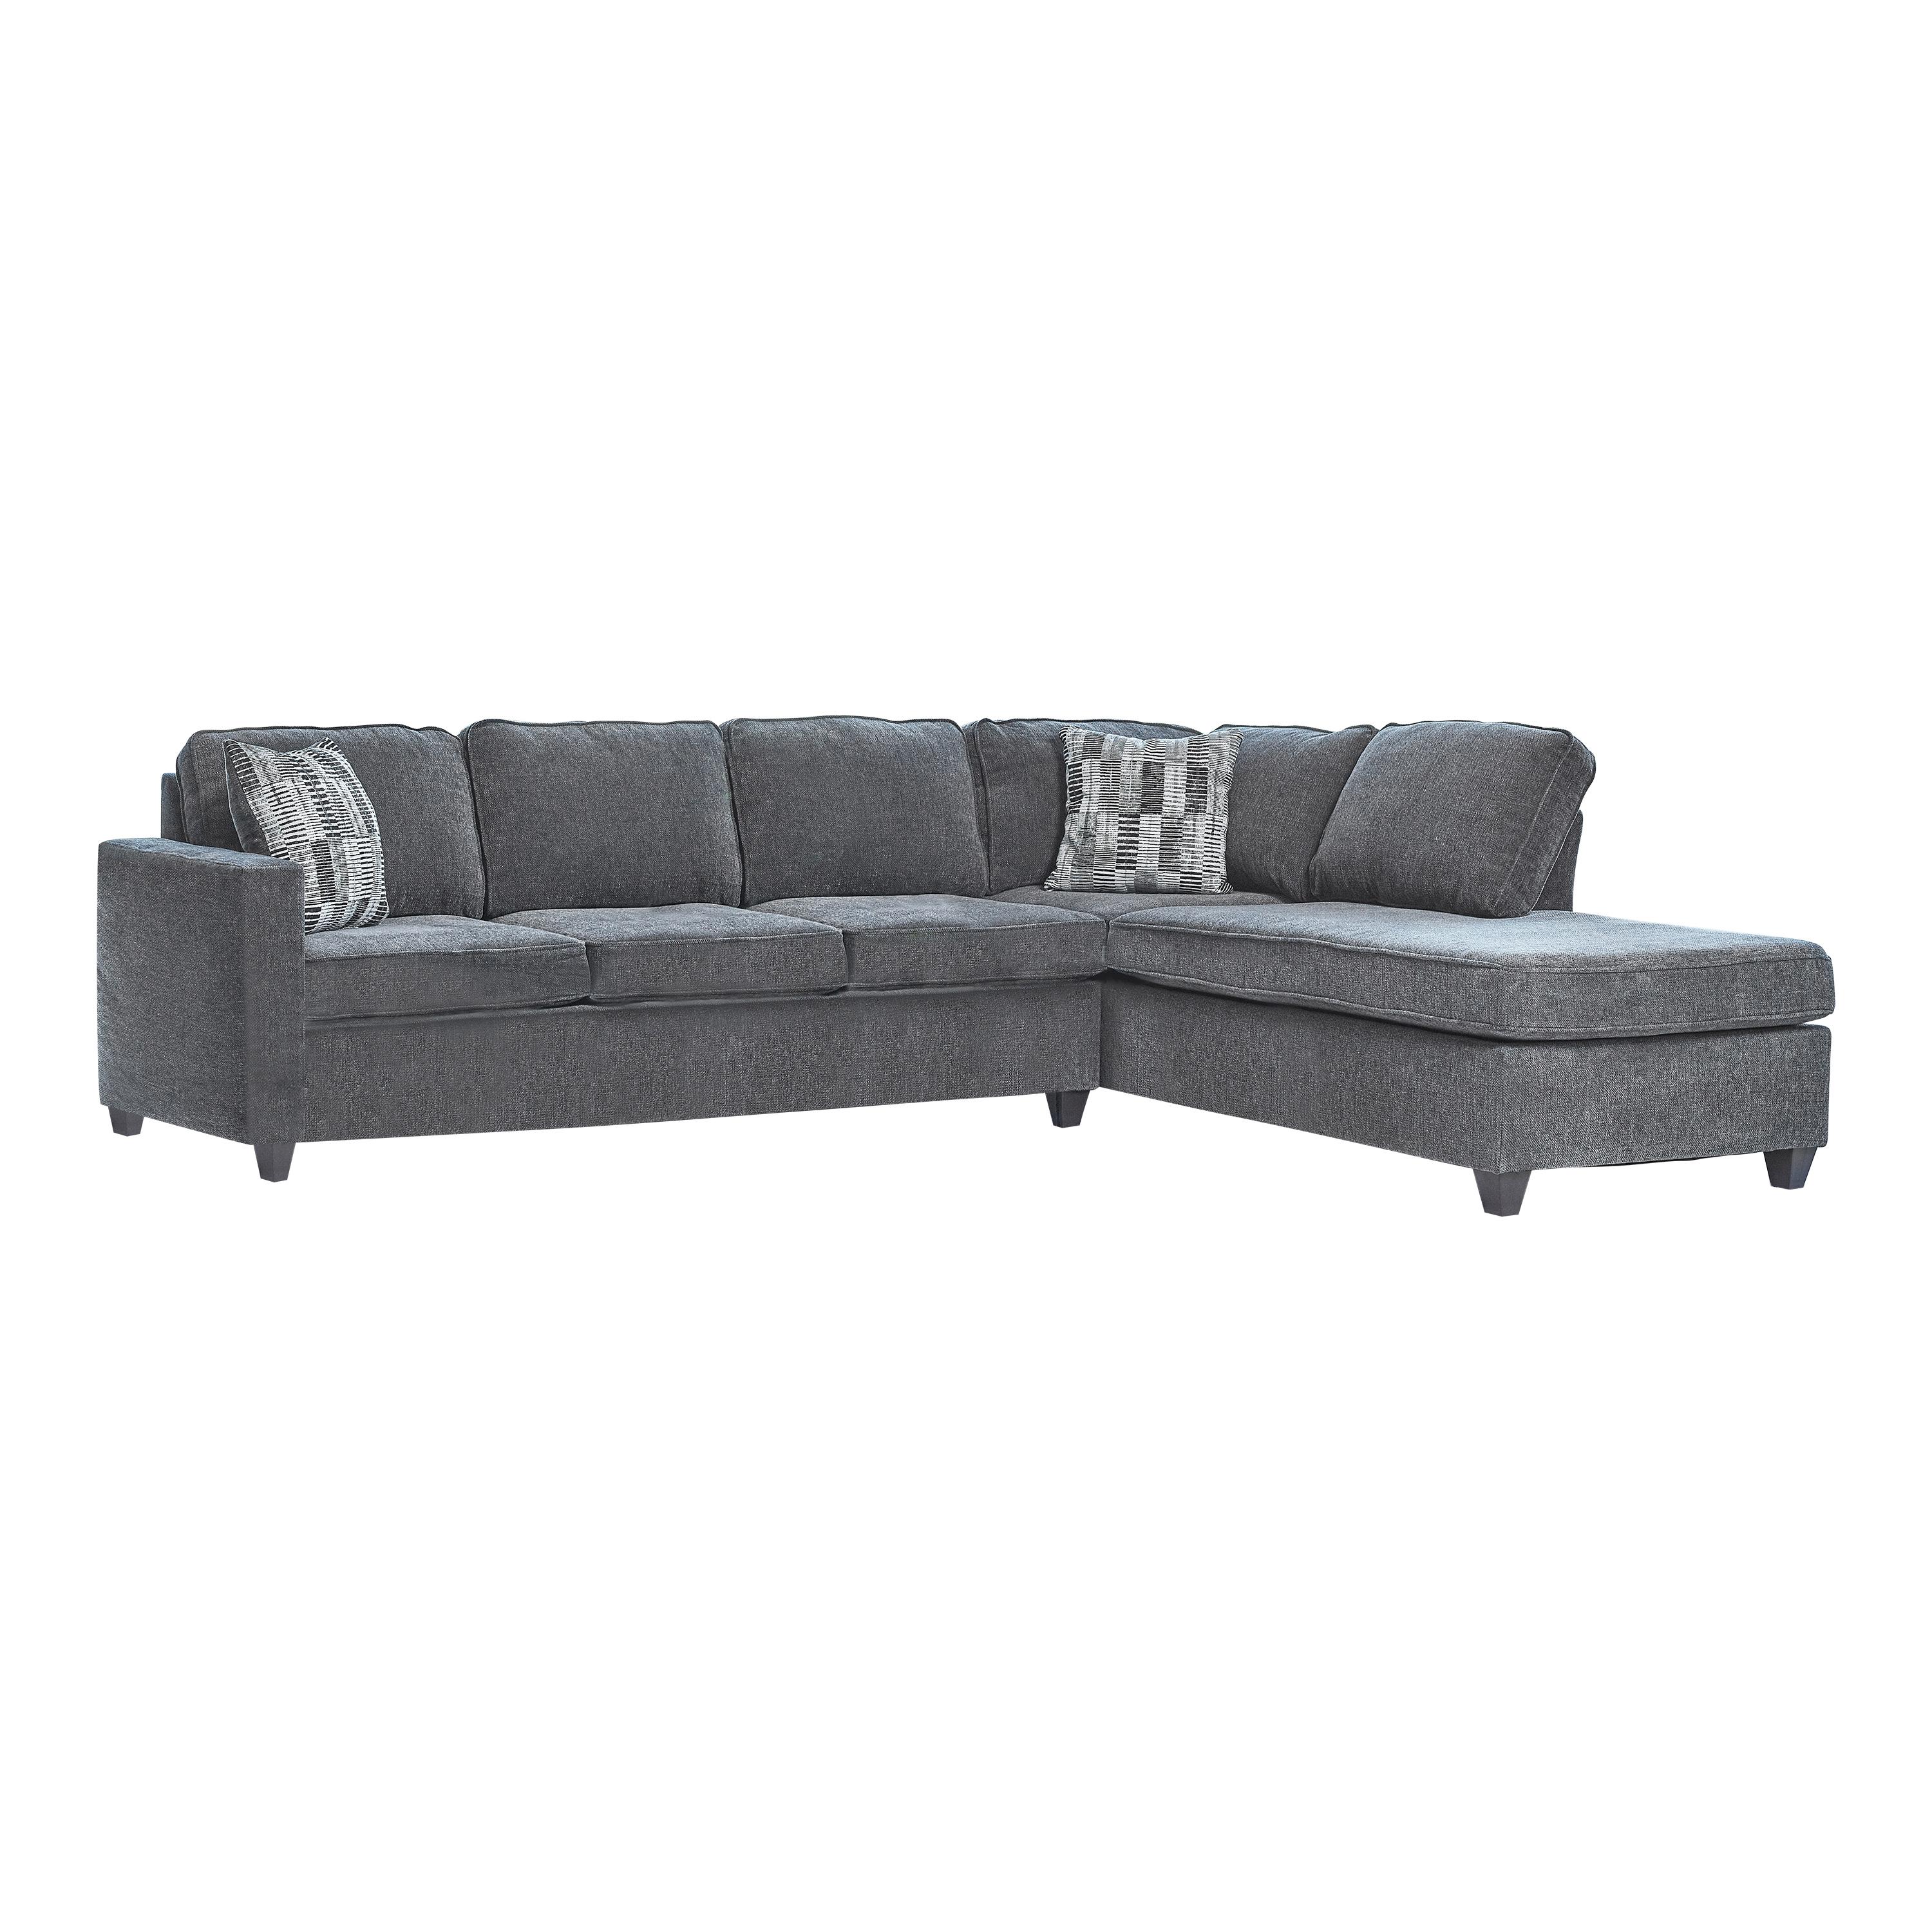 Transitional Sectional 509347 Mccord 509347 in Dark Gray Chenille